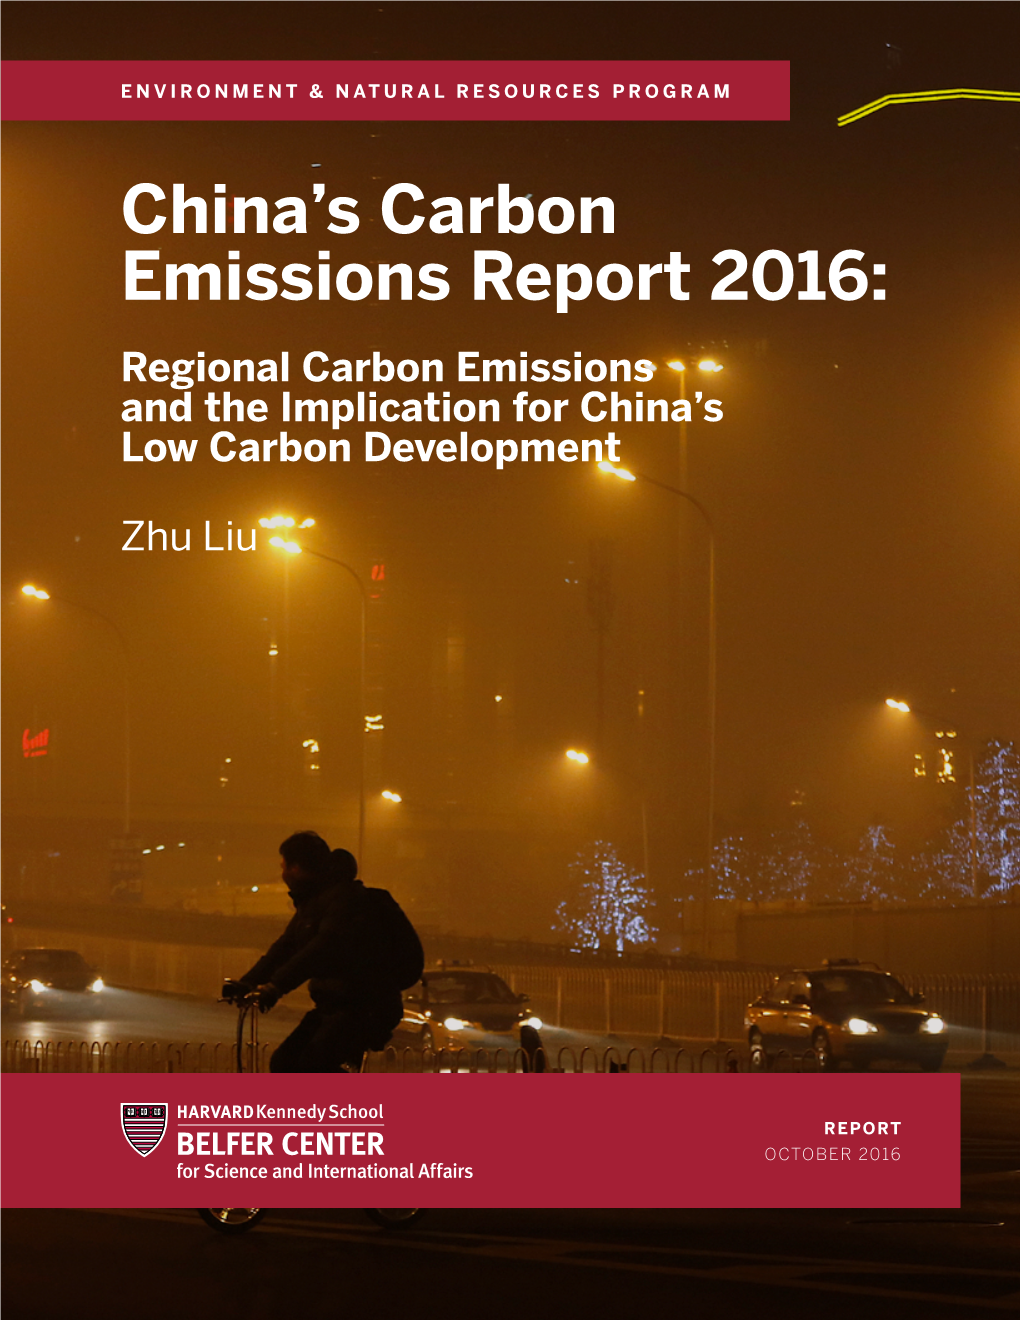 China's Carbon Emissions Report 2016